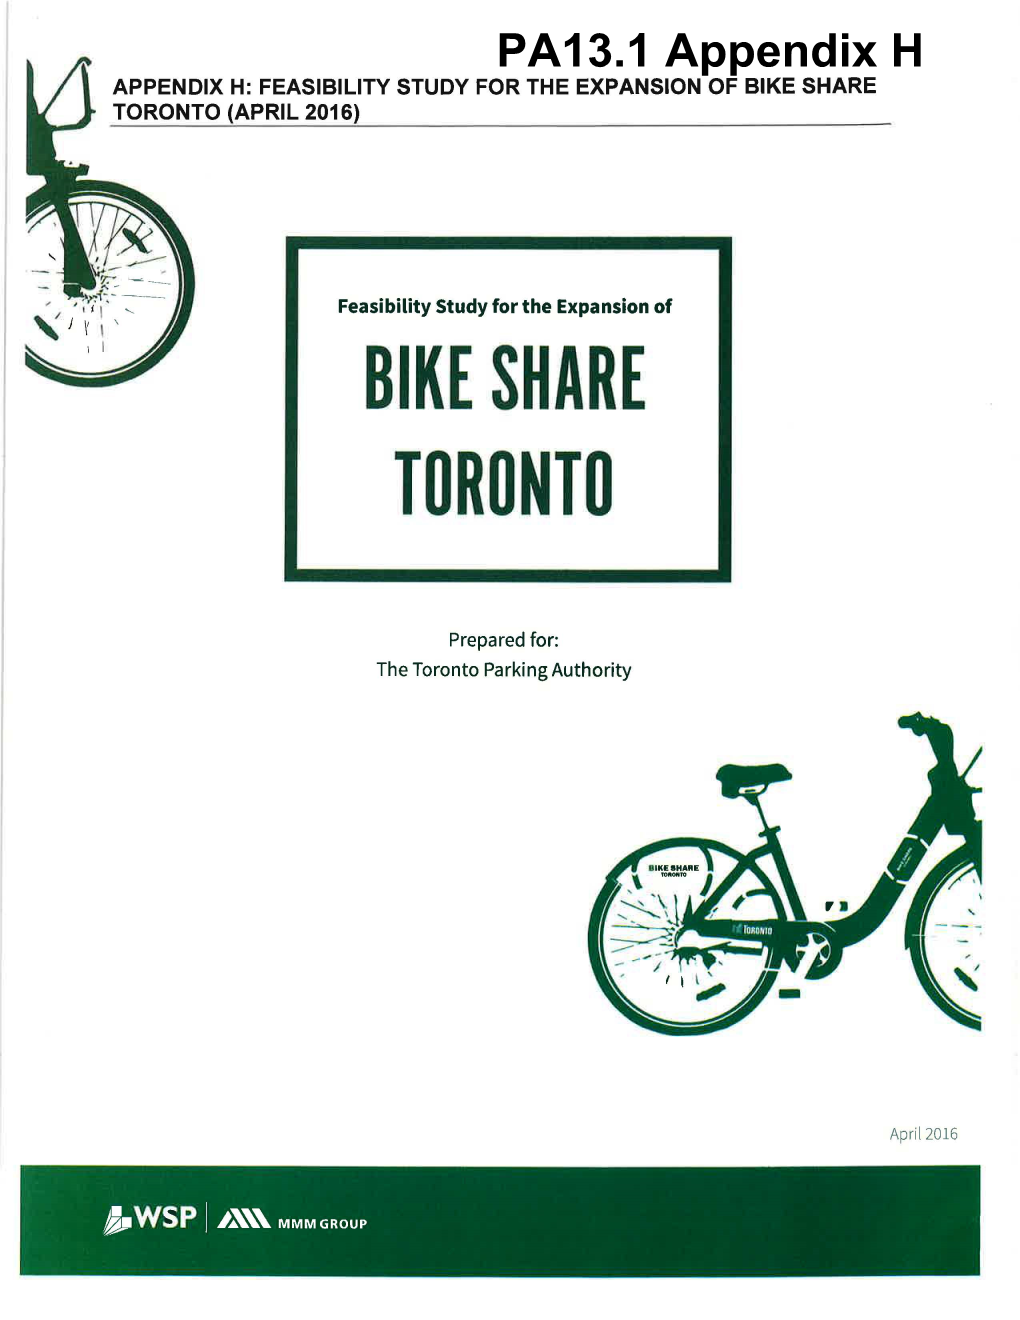 Feasibility Study for the Expansion of Bike Share Toronto (April 2016)